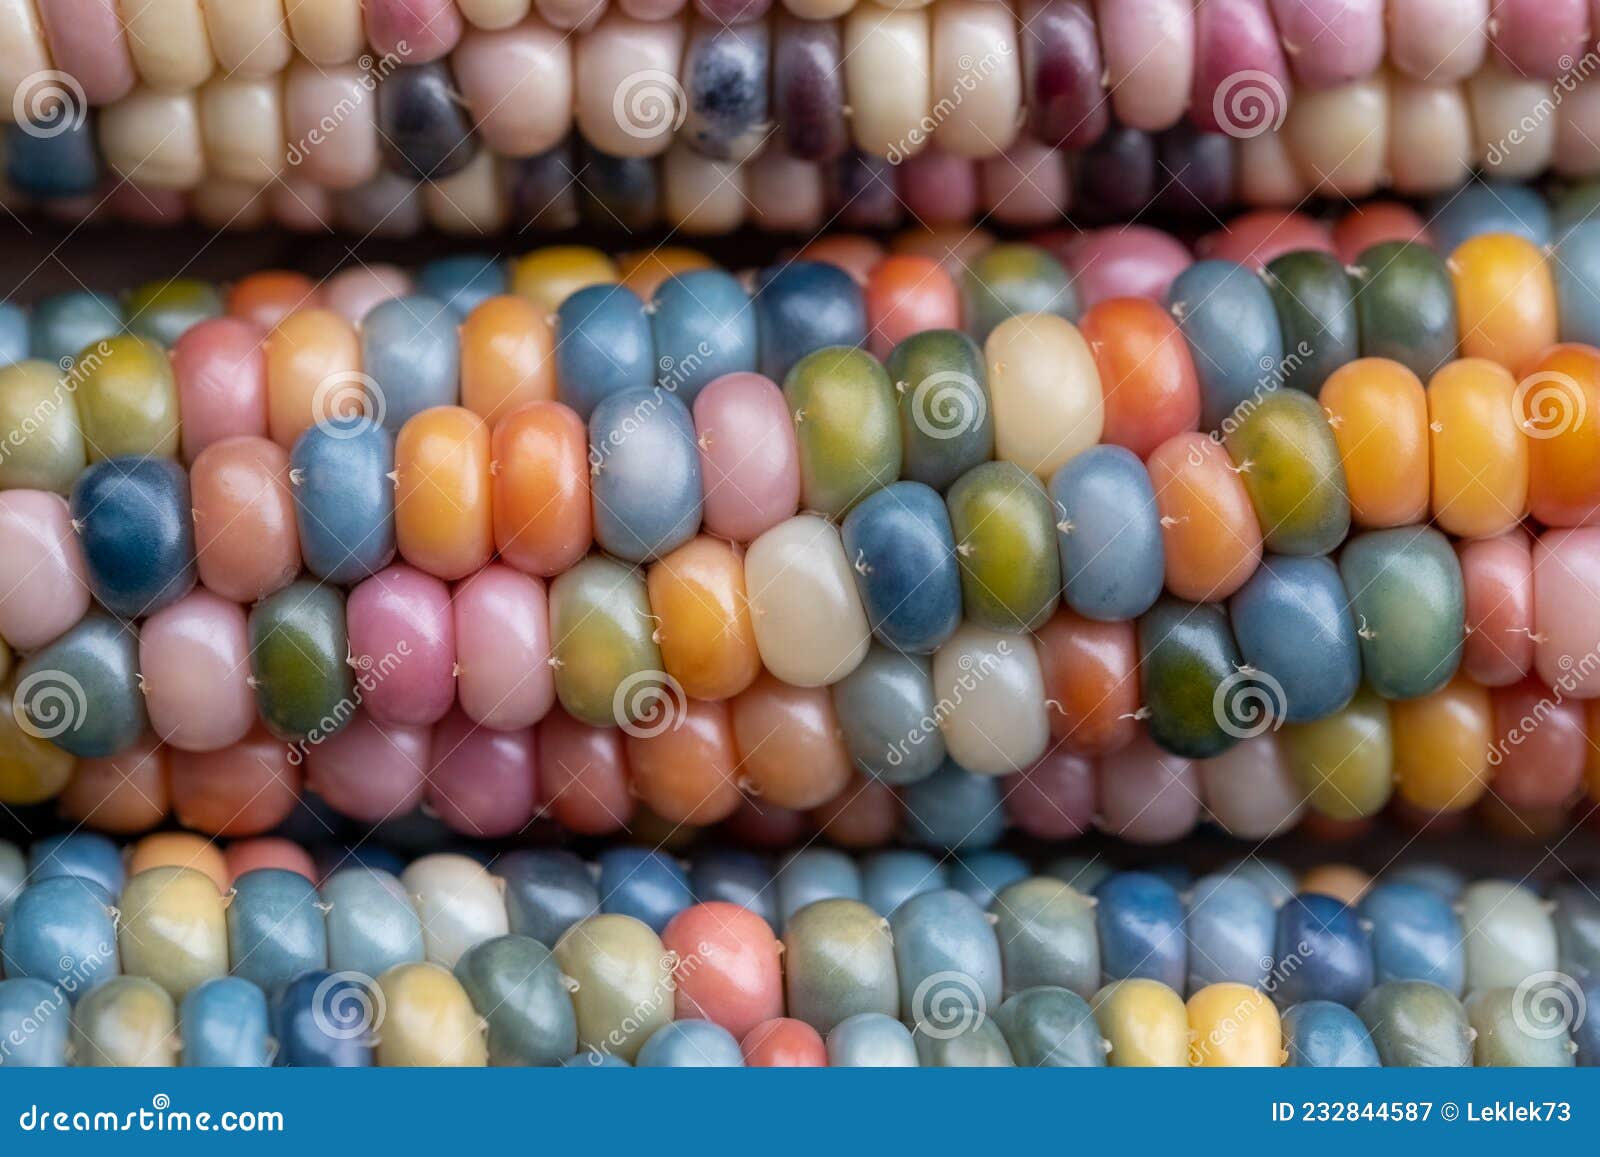 close up of zea mays gem glass cobs of corn with rainbow coloured kernels, grown on an allotment in london uk.